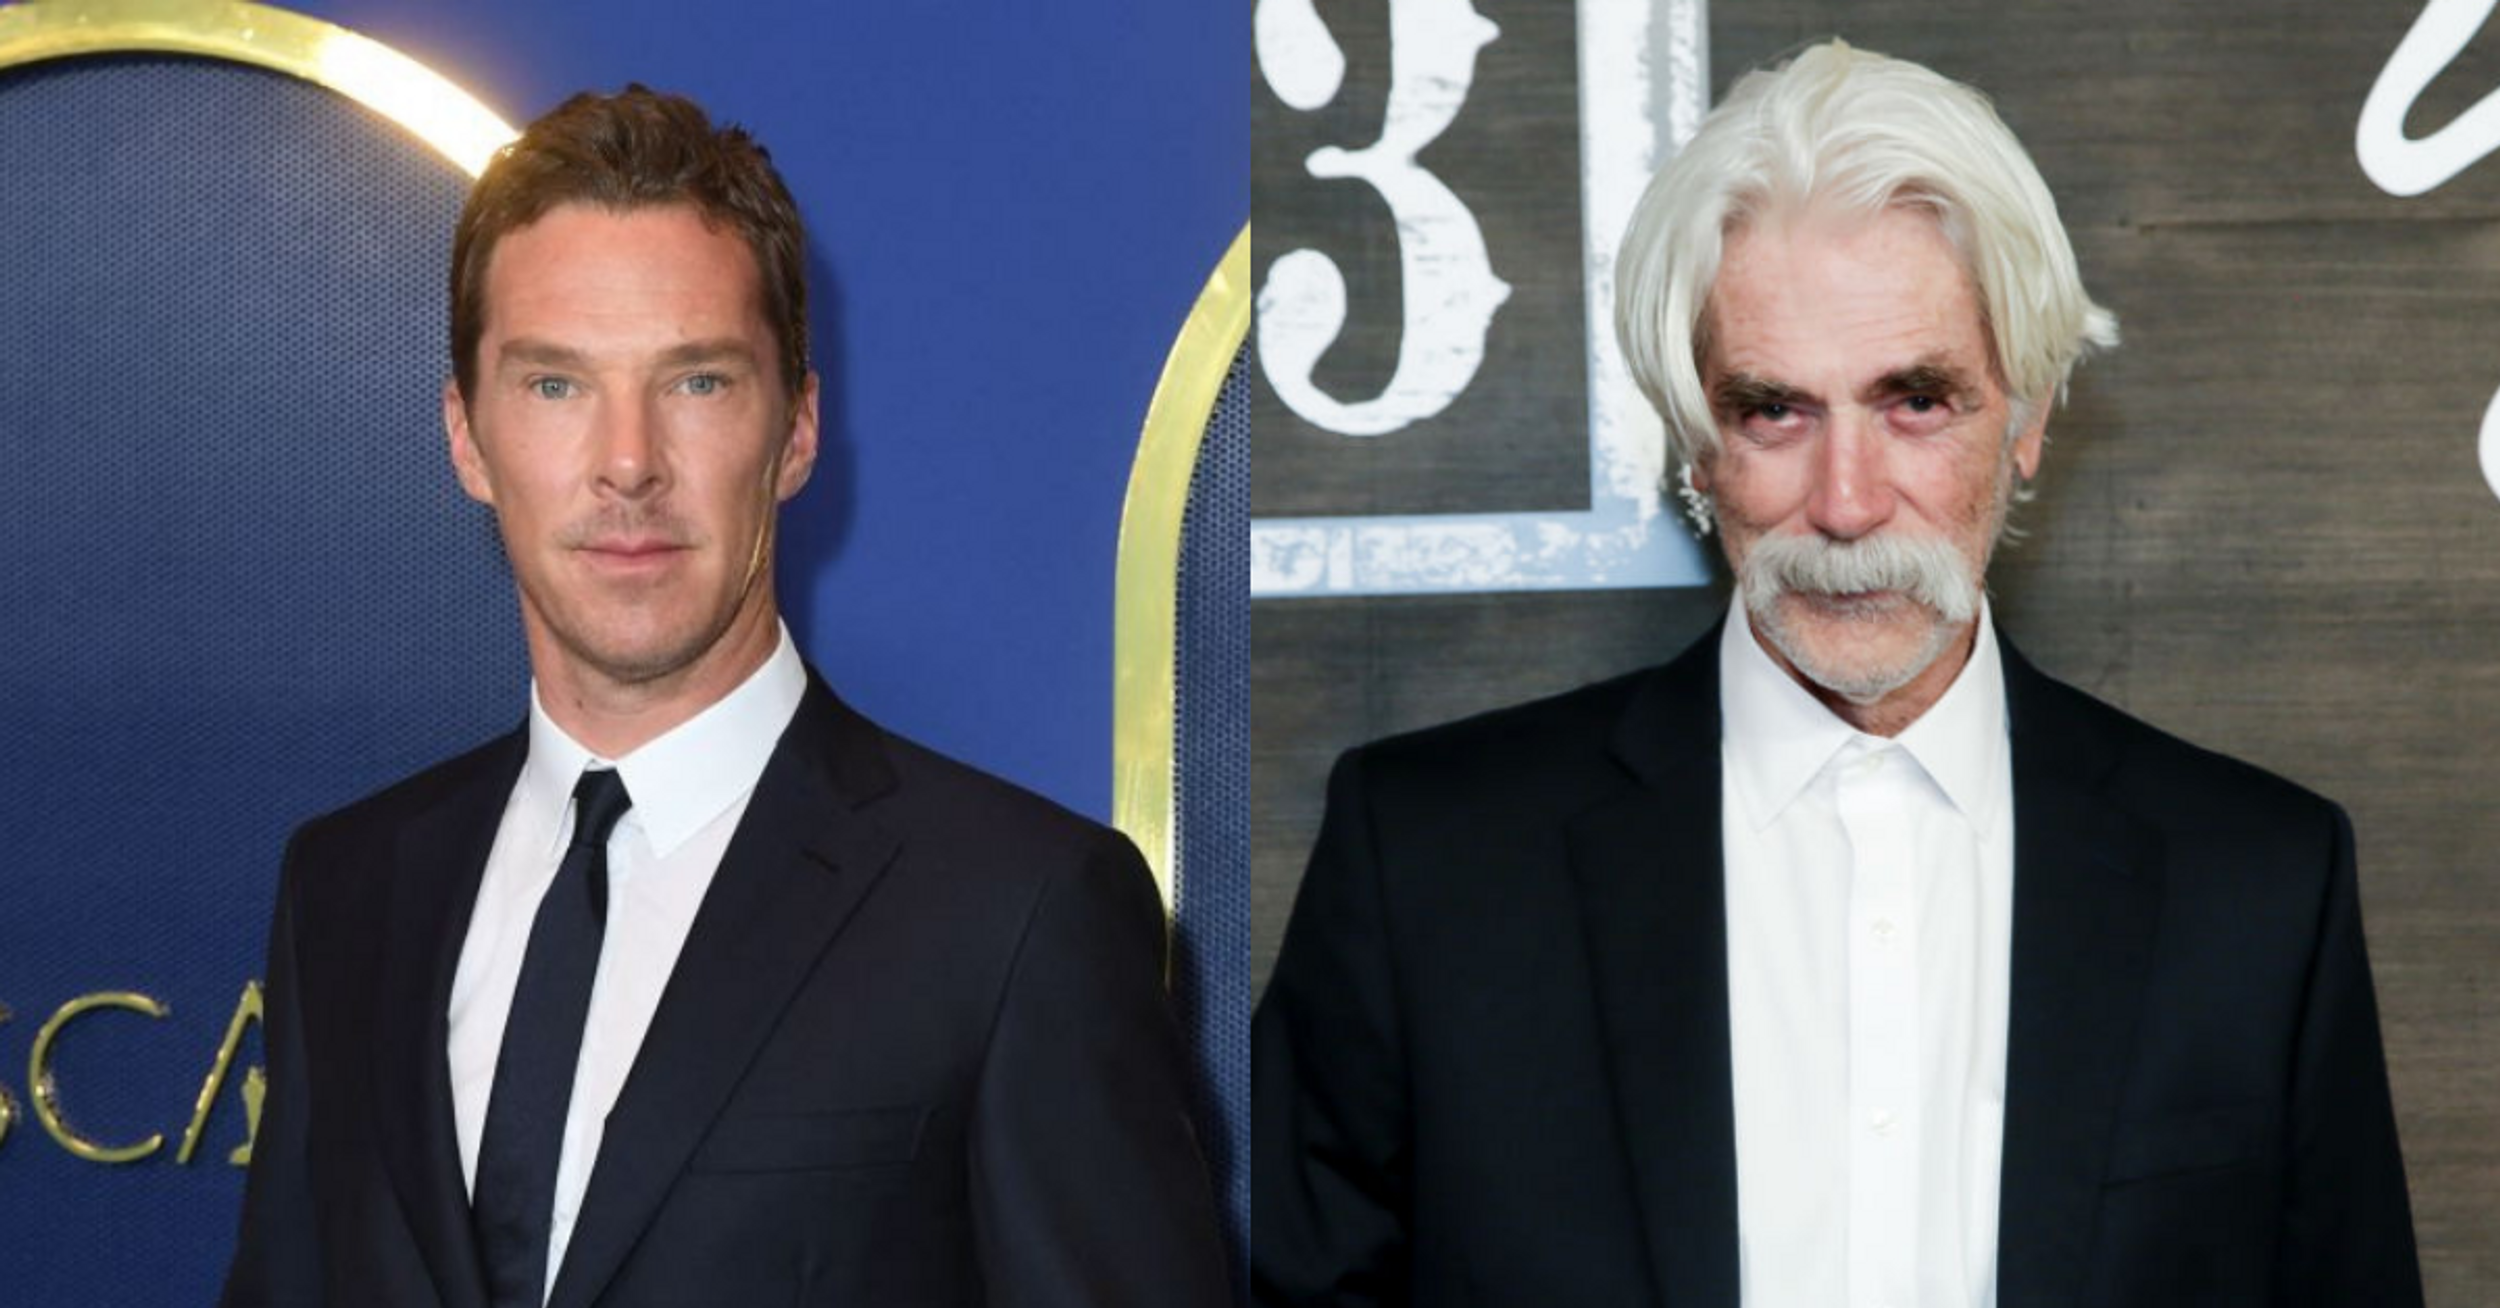 Benedict Cumberbatch Offers Thoughtful Response To Sam Elliott's 'Power Of The Dog' Criticism